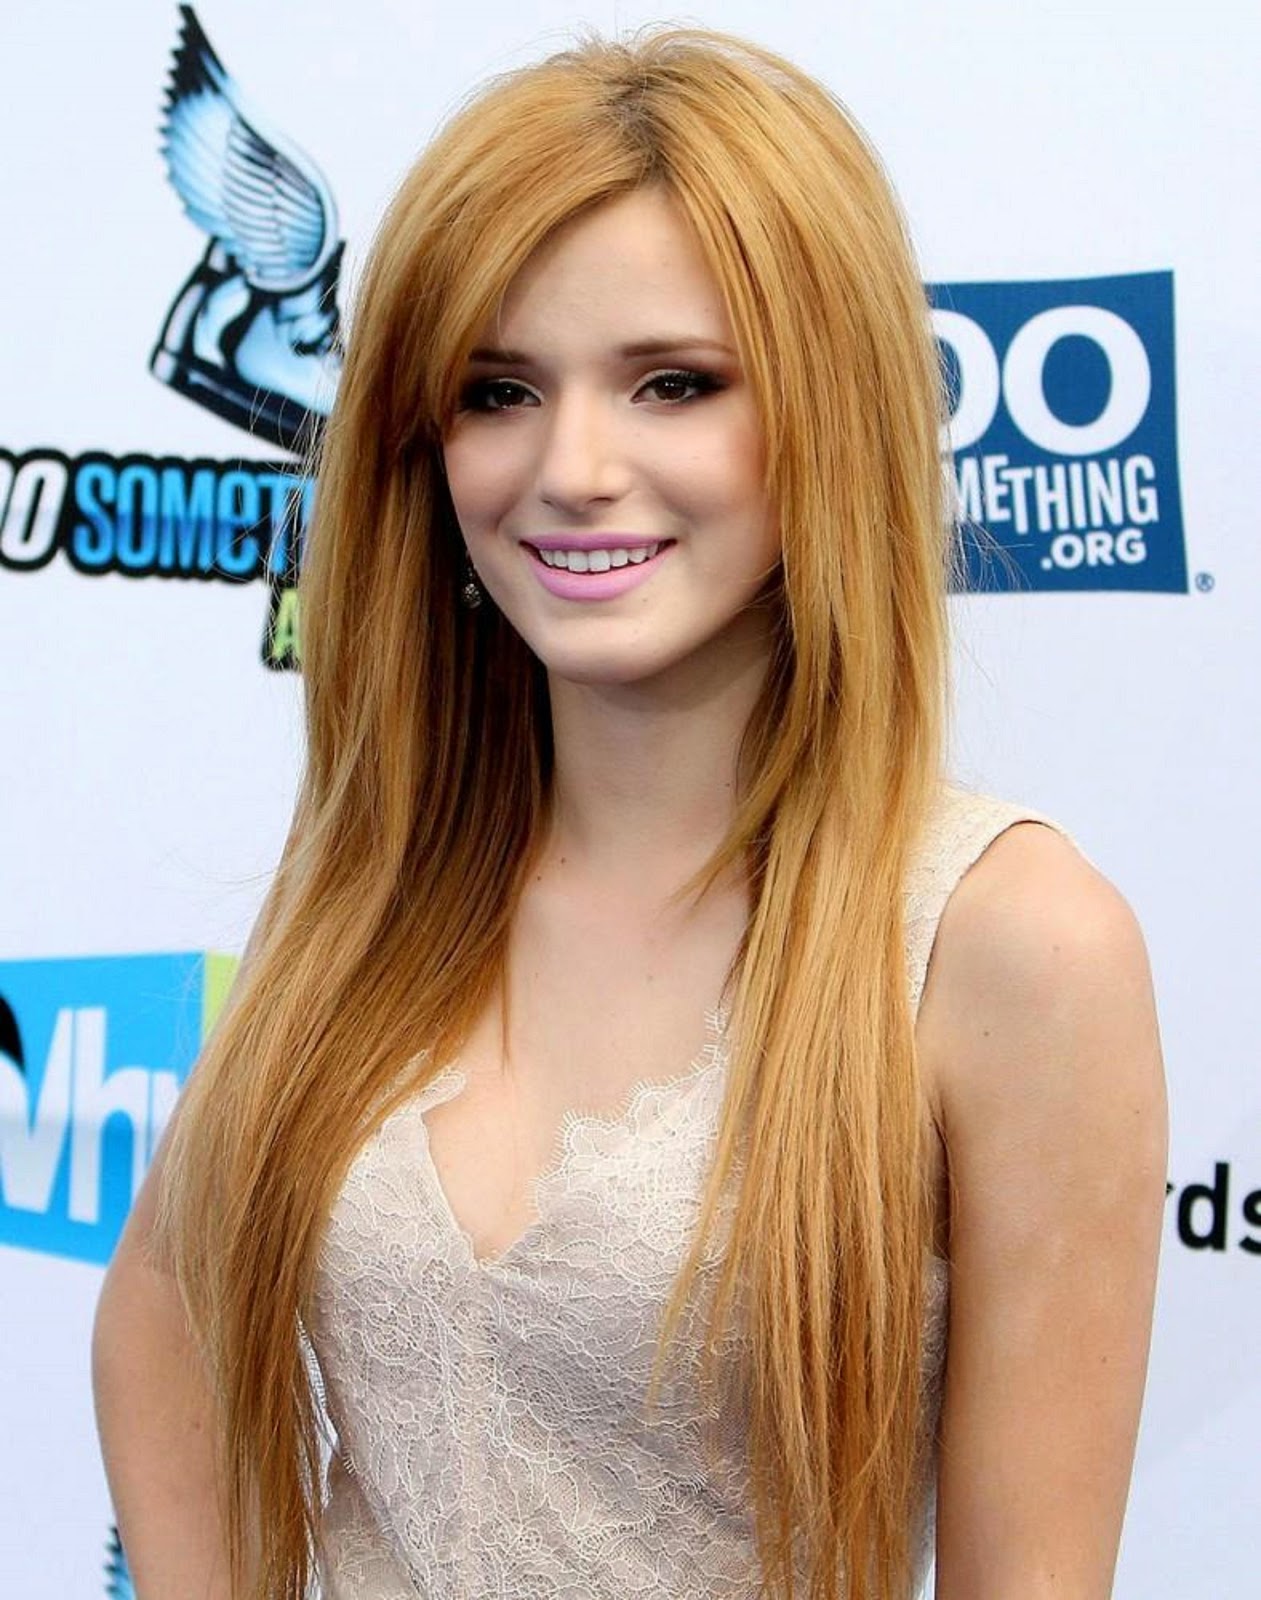 Bella Thorne HD Images and Wallpapers - Hollywood Actress